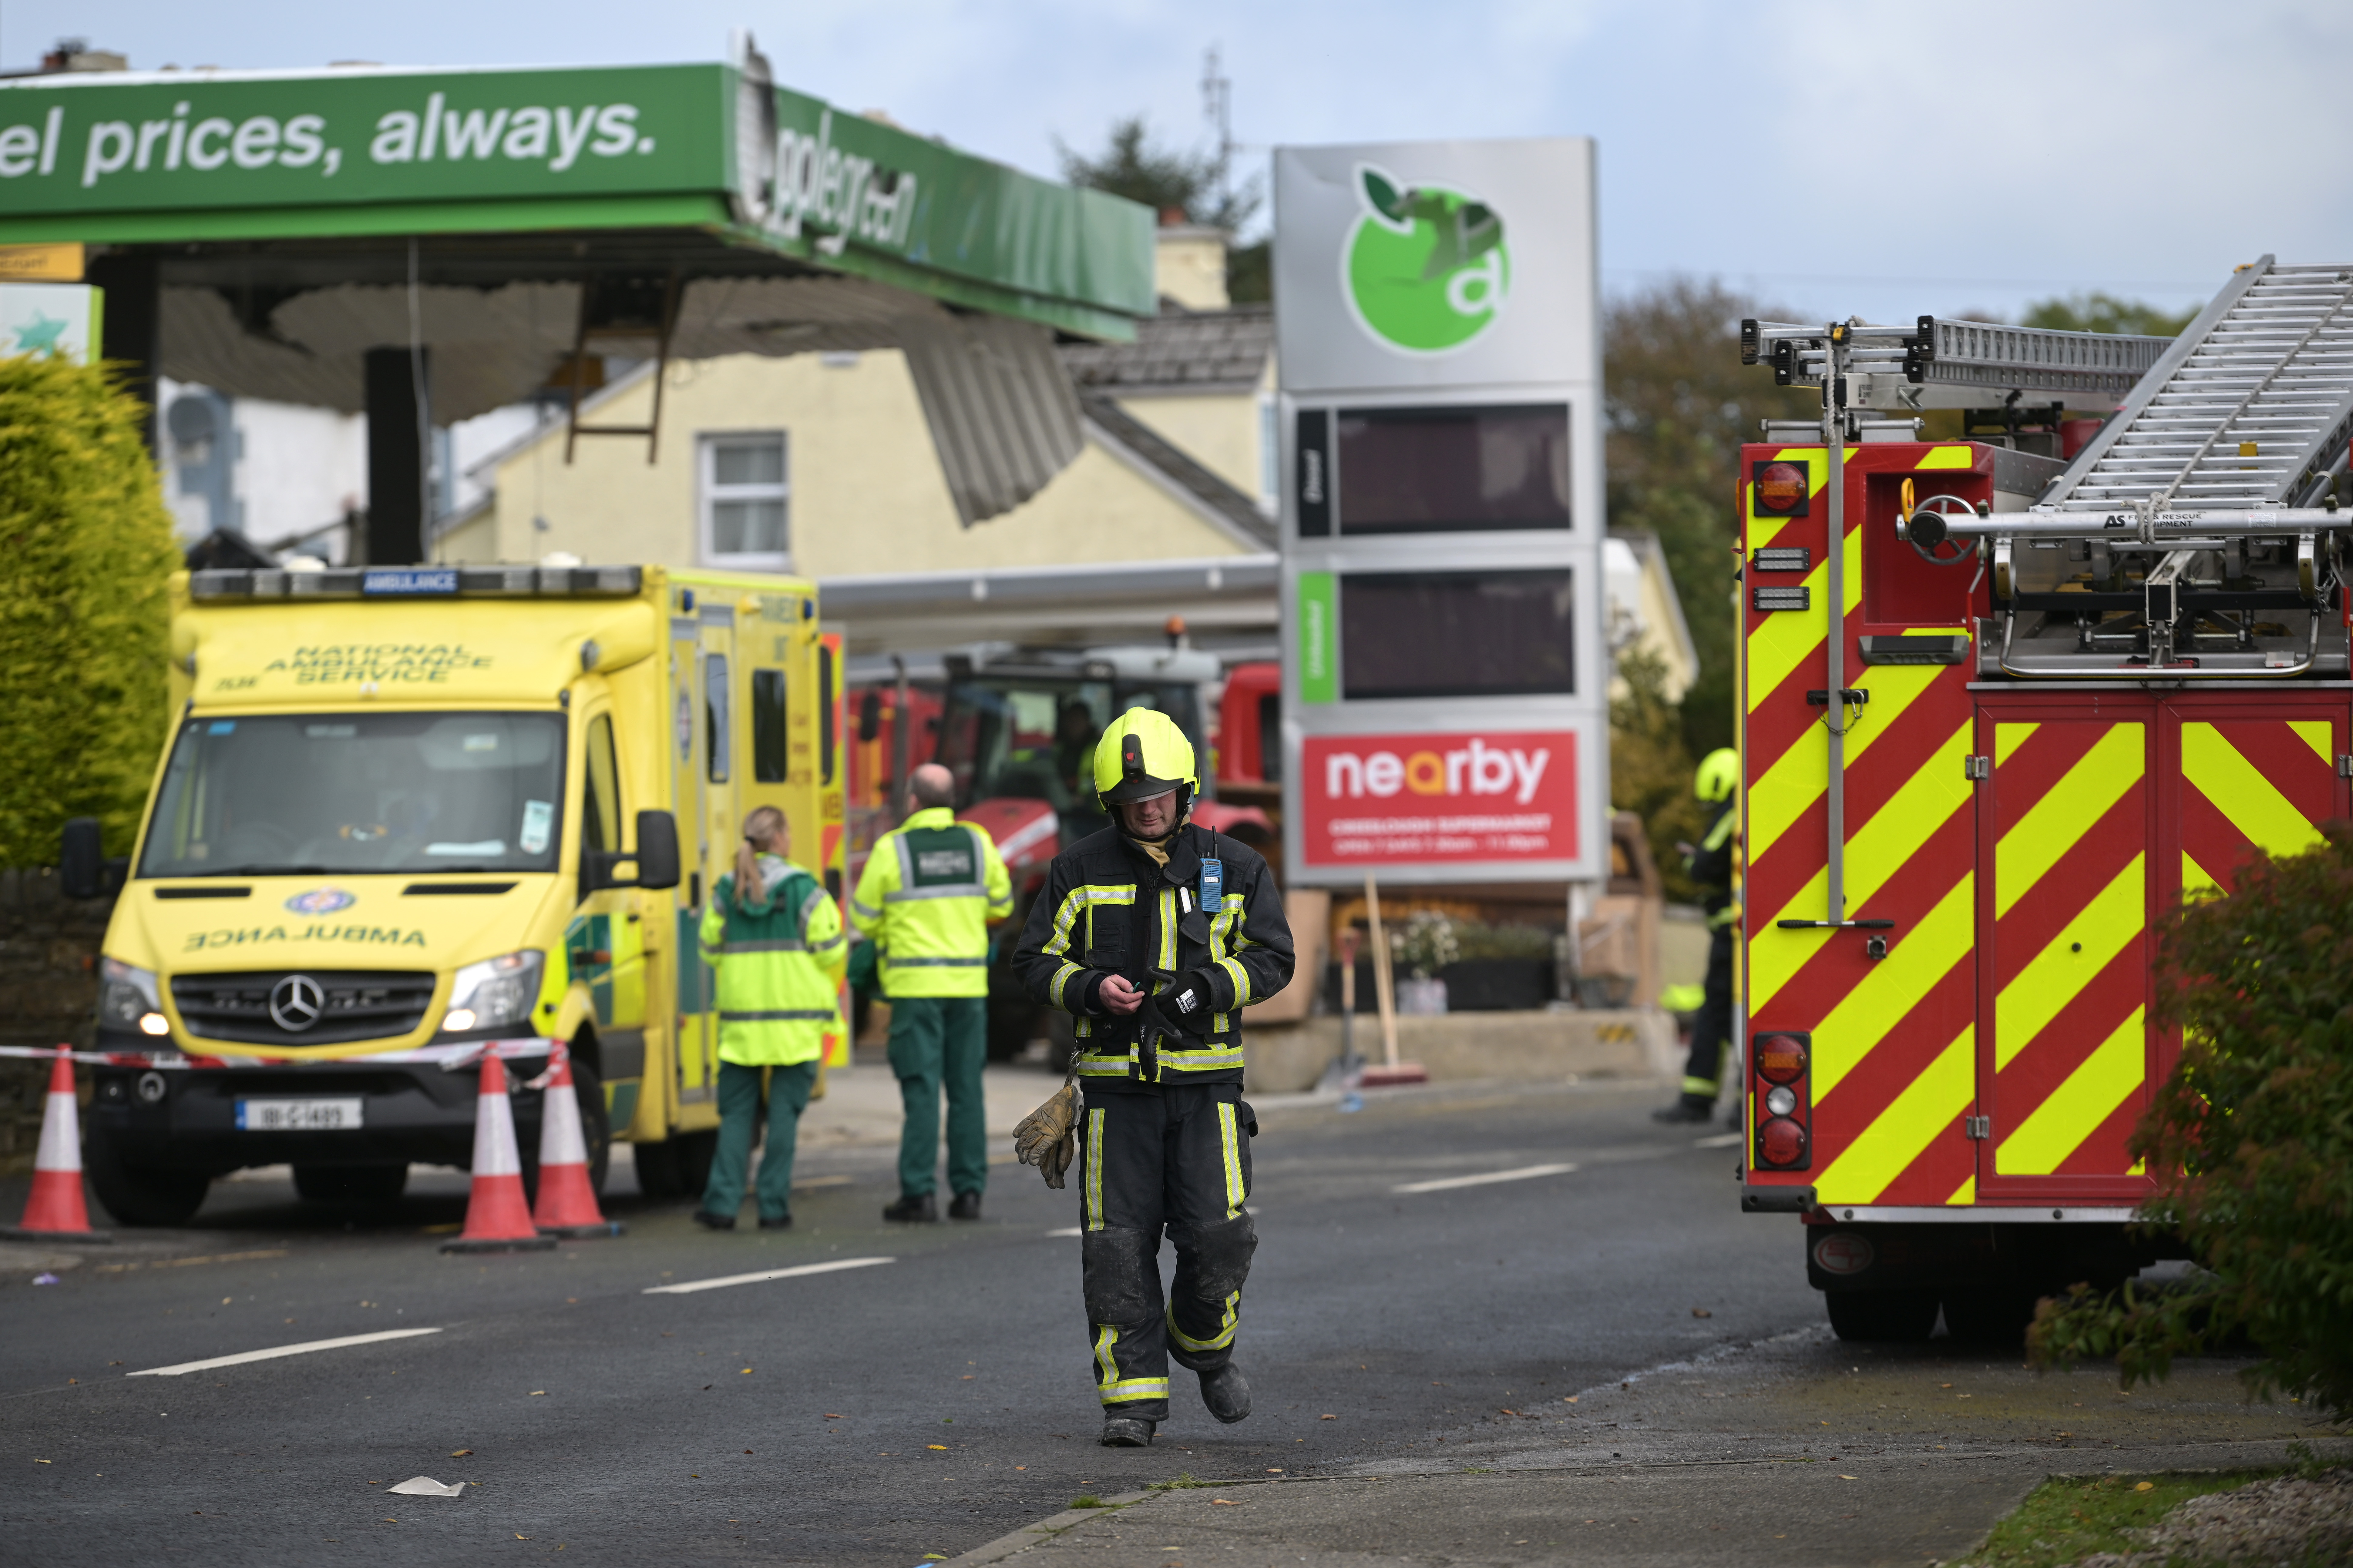 A view of rescue workers at a gas station in Ireland following a deadly explosion.